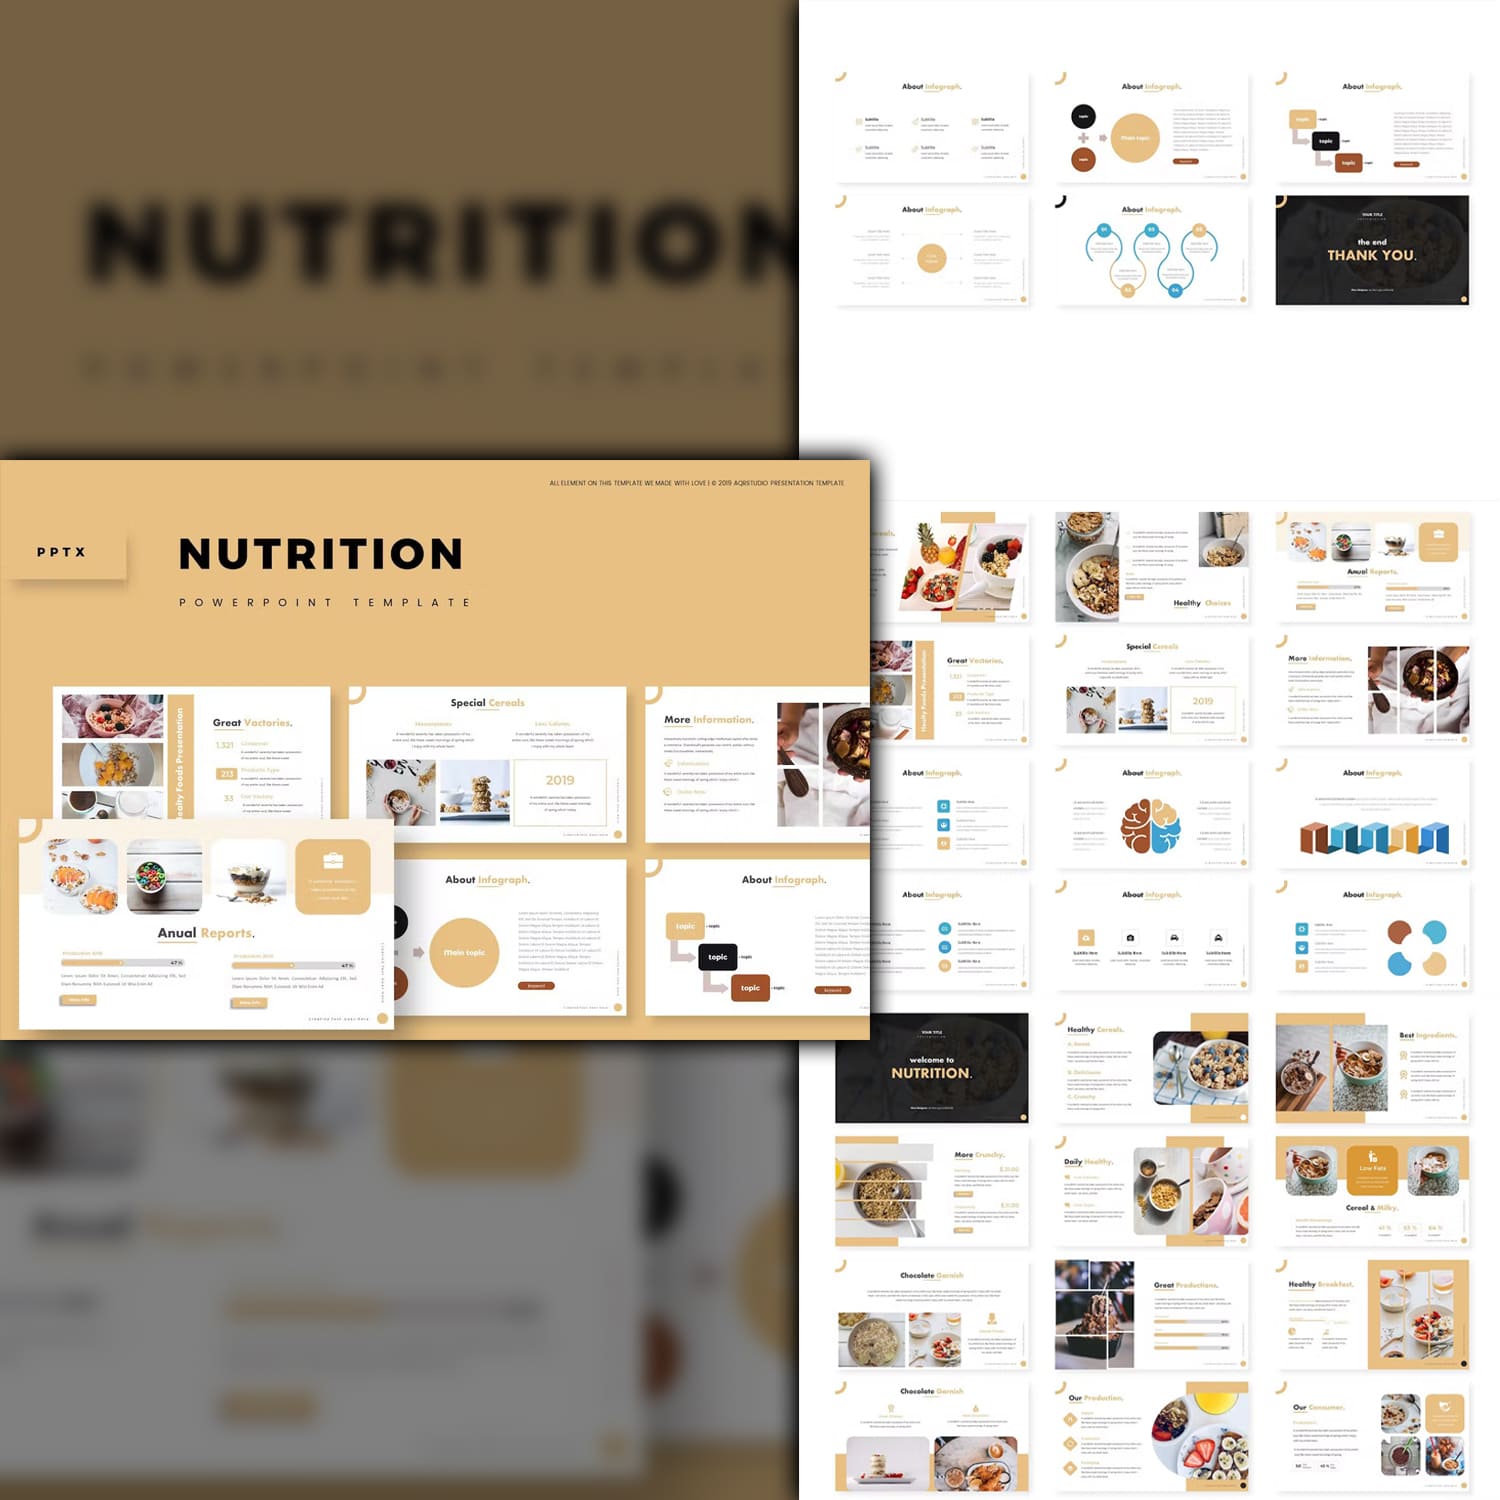 Nutrition powerpoint template from aqrstudio.